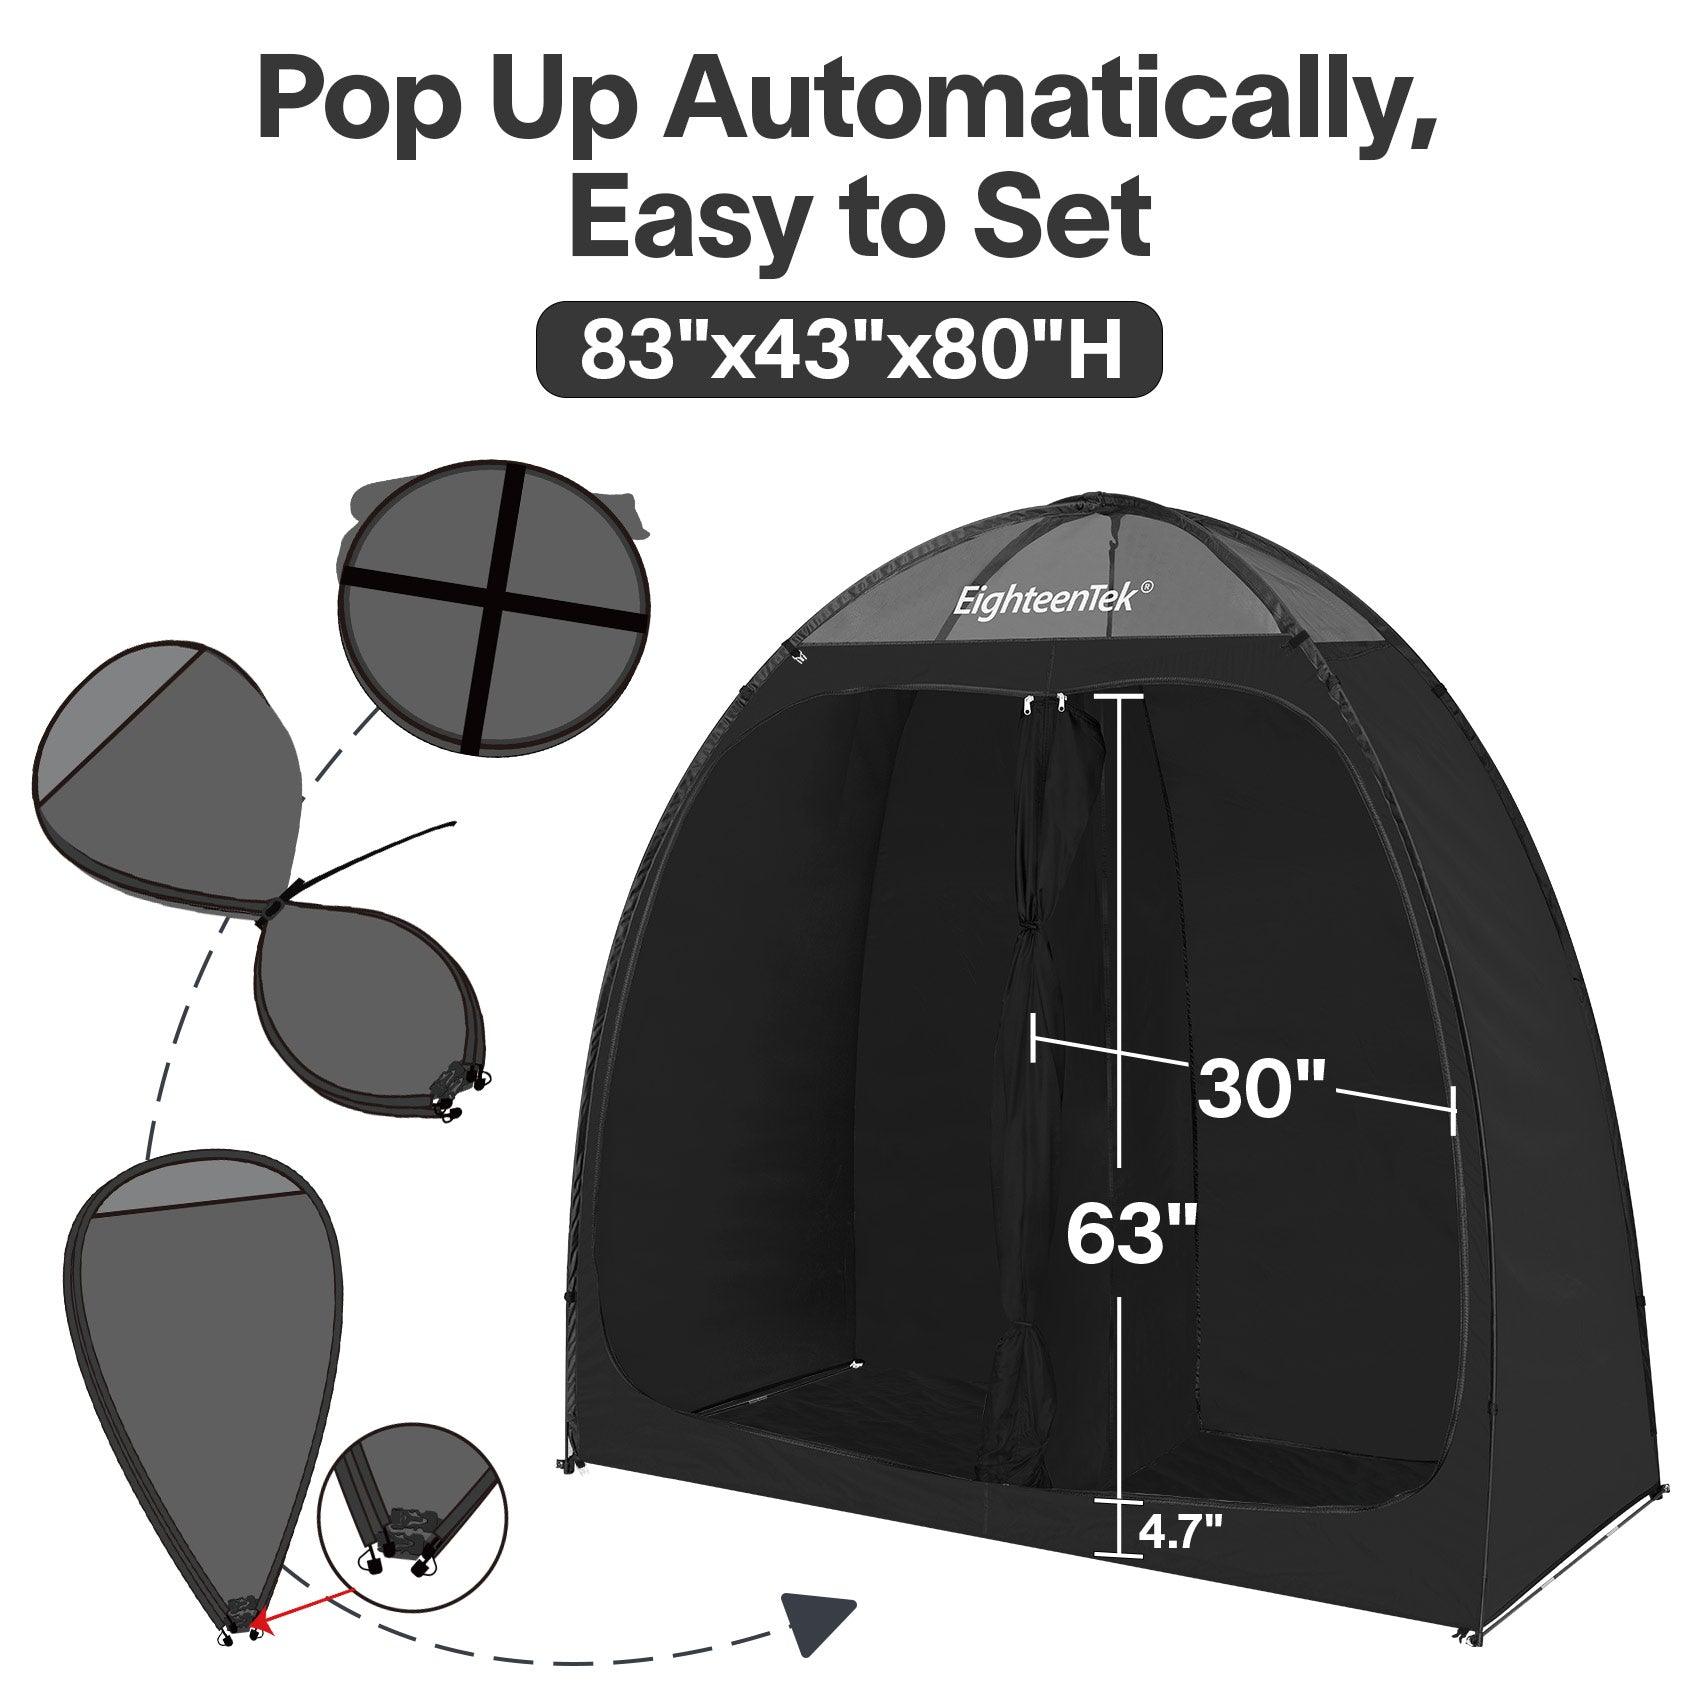 EighteenTek Pop Up Shower Tent Changing Room 2 Rooms Outdoor Camping Toilet Portable Privacy Dressing Shelter